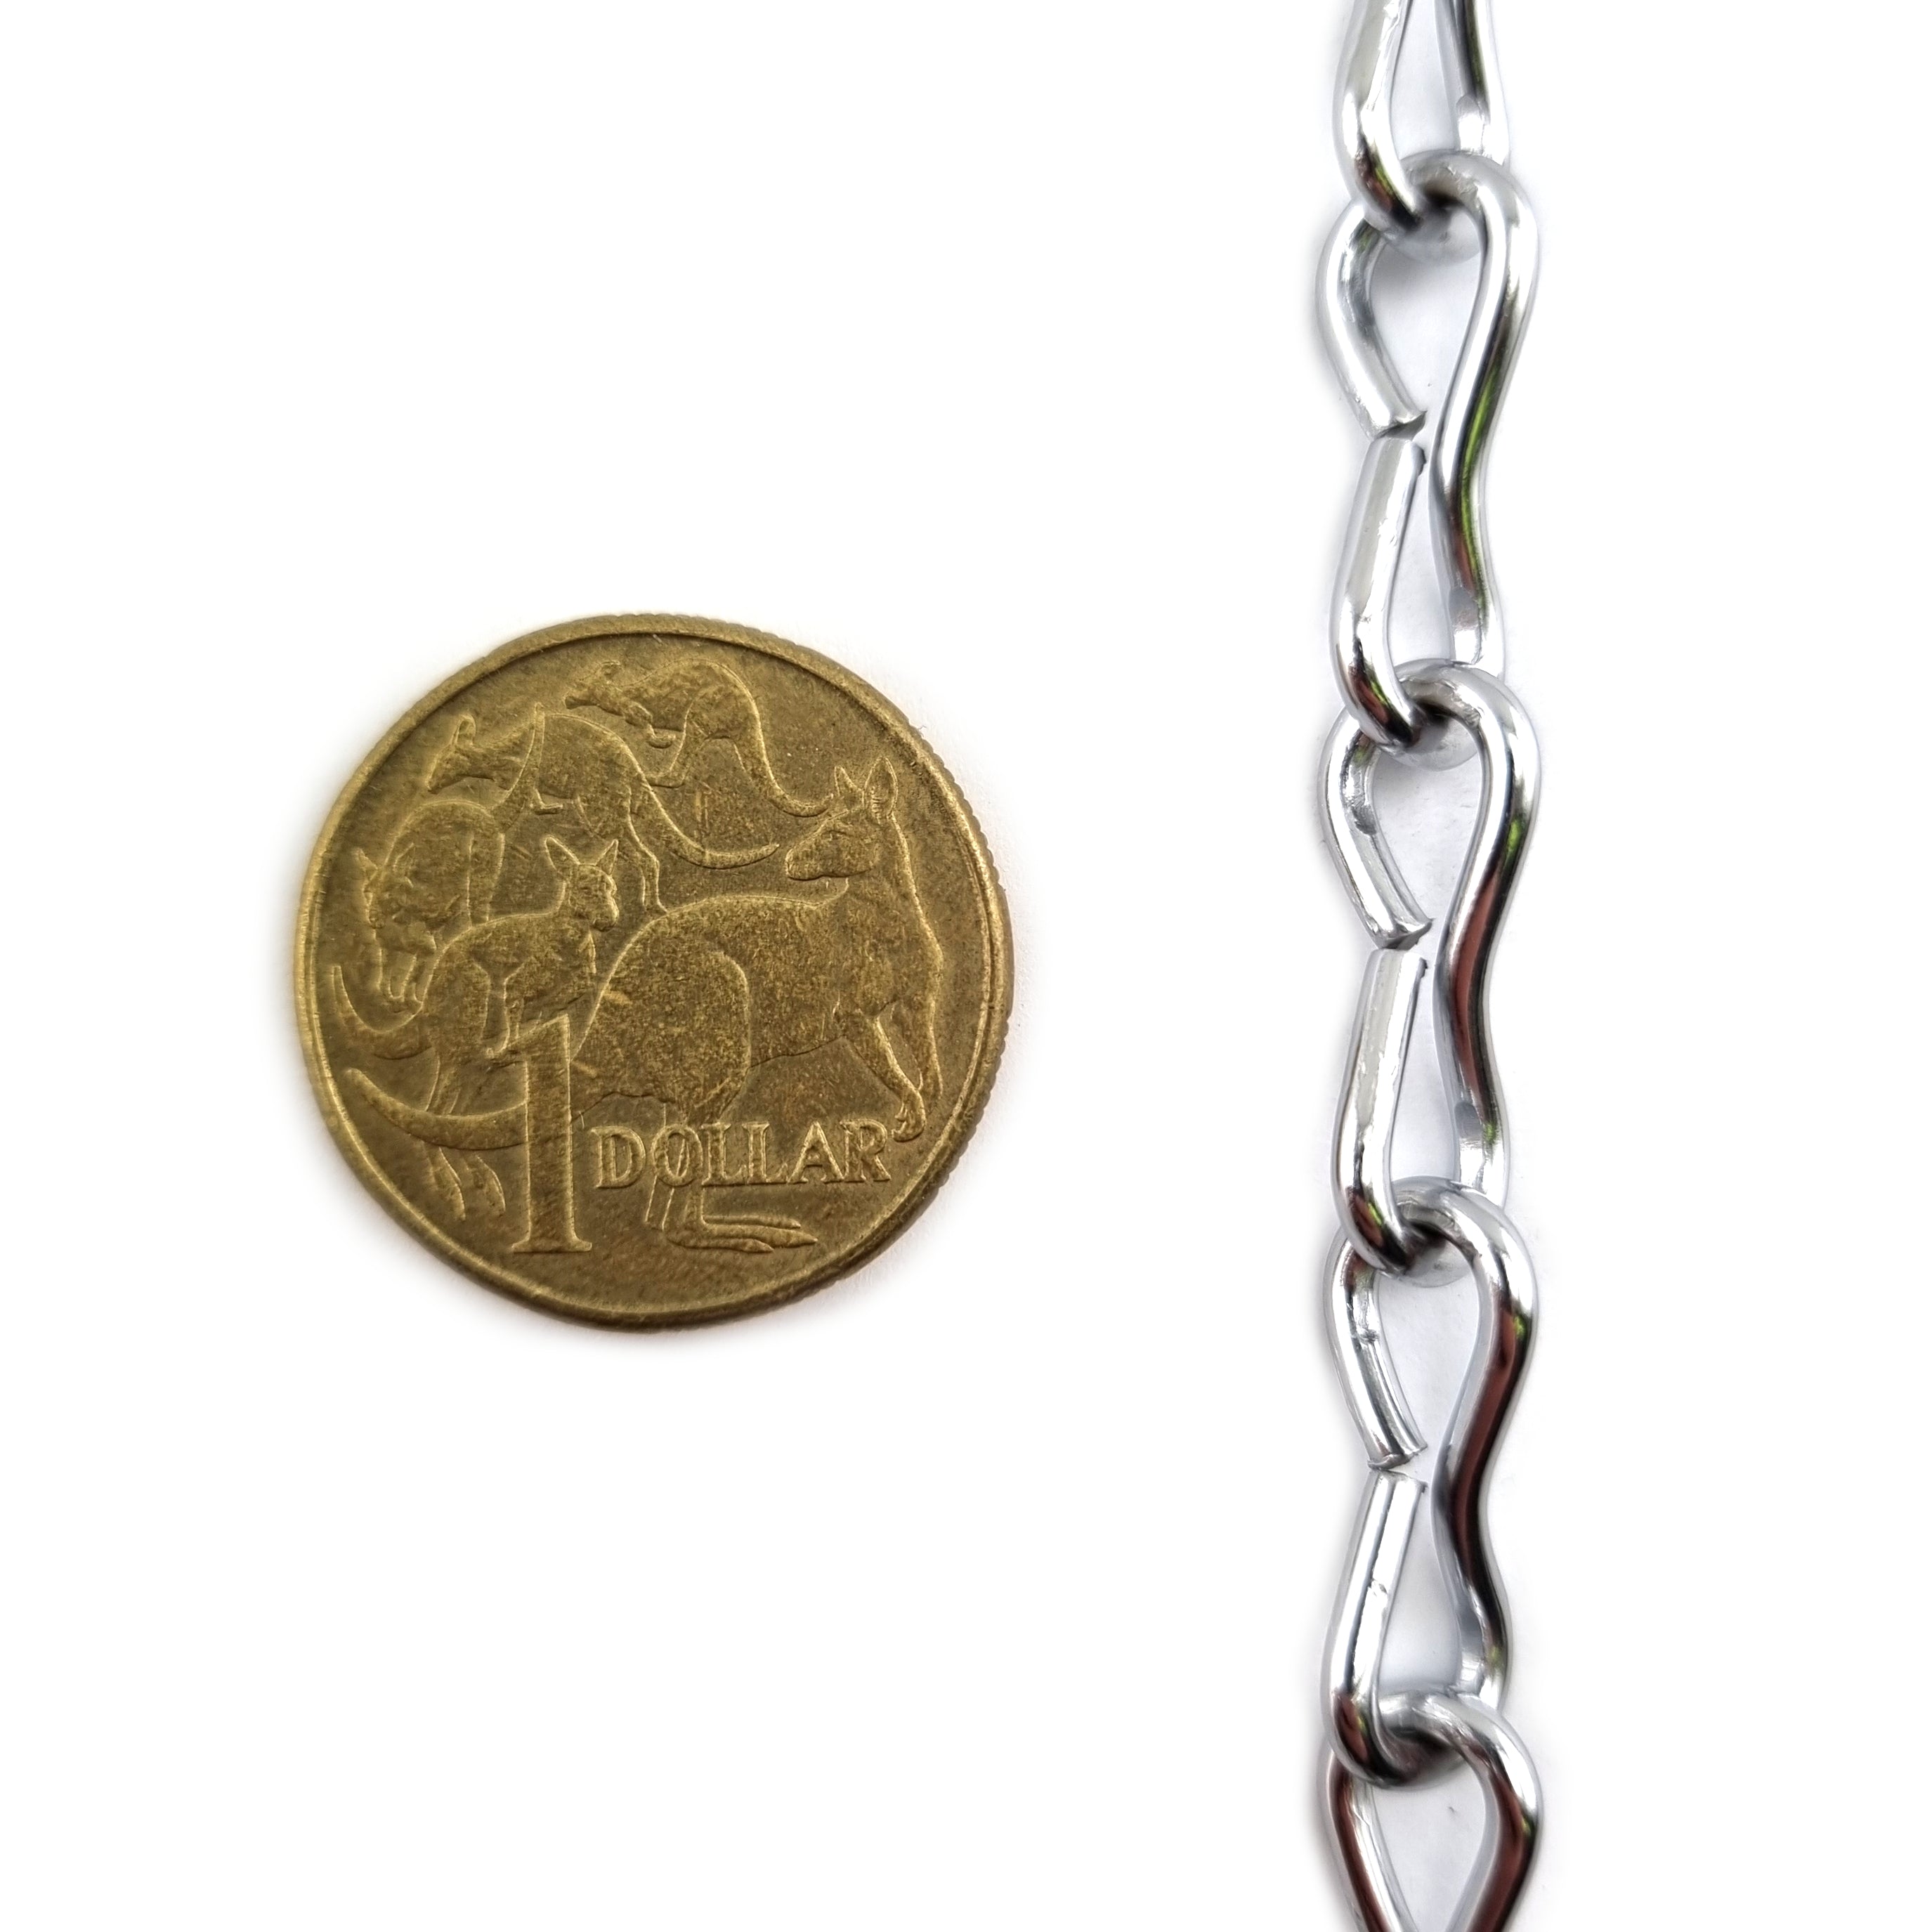 Single jack chain in a high polished chrome plated finish, size 2mm, on a 30-metre reel. Australia